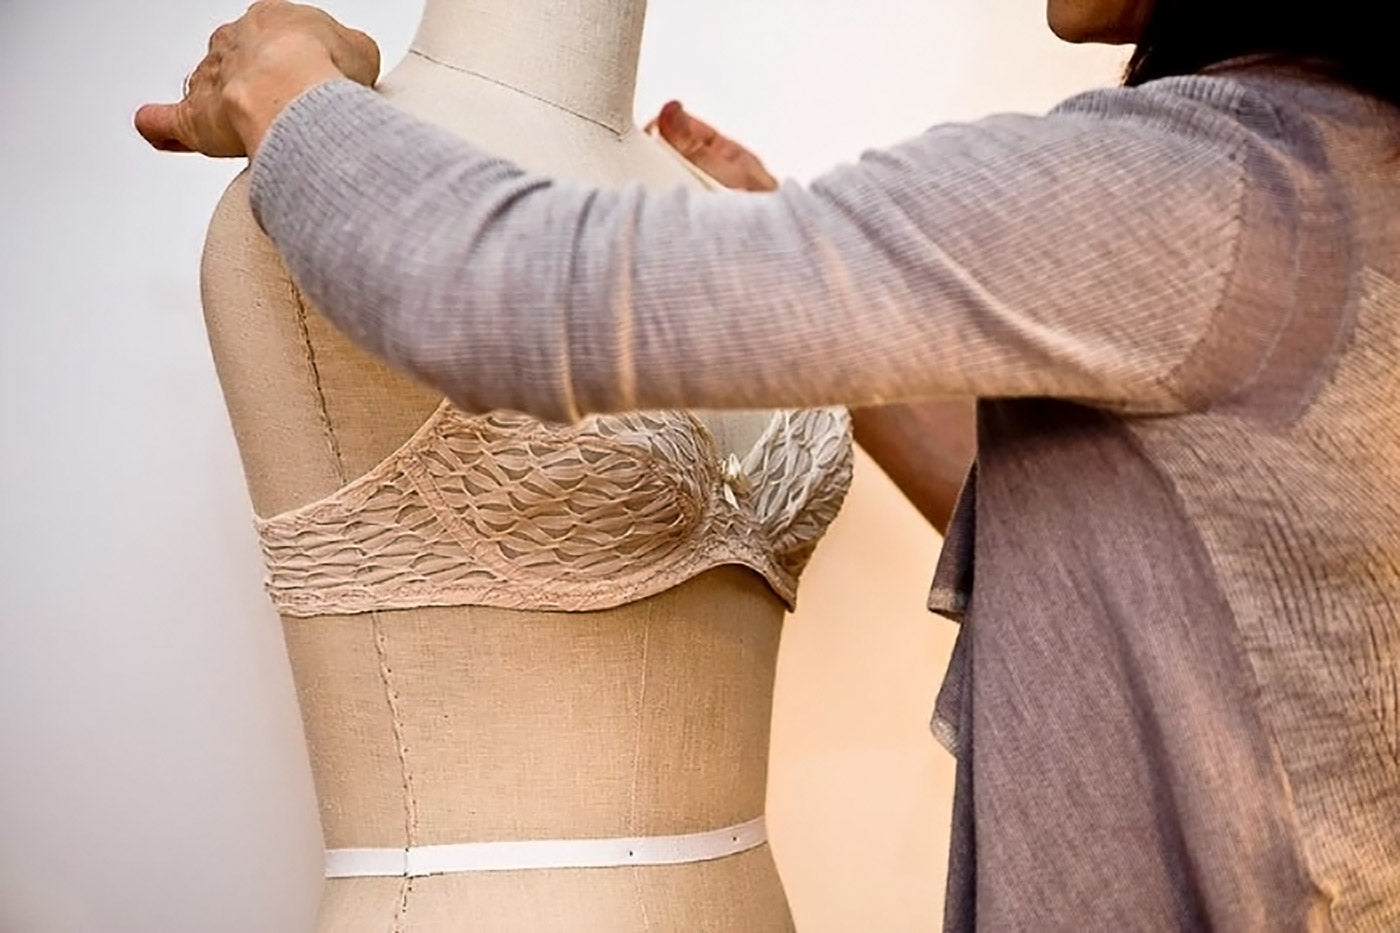 Close up of a woman's hands adjusting the straps of a white, lacy underwire bra on a dress form.